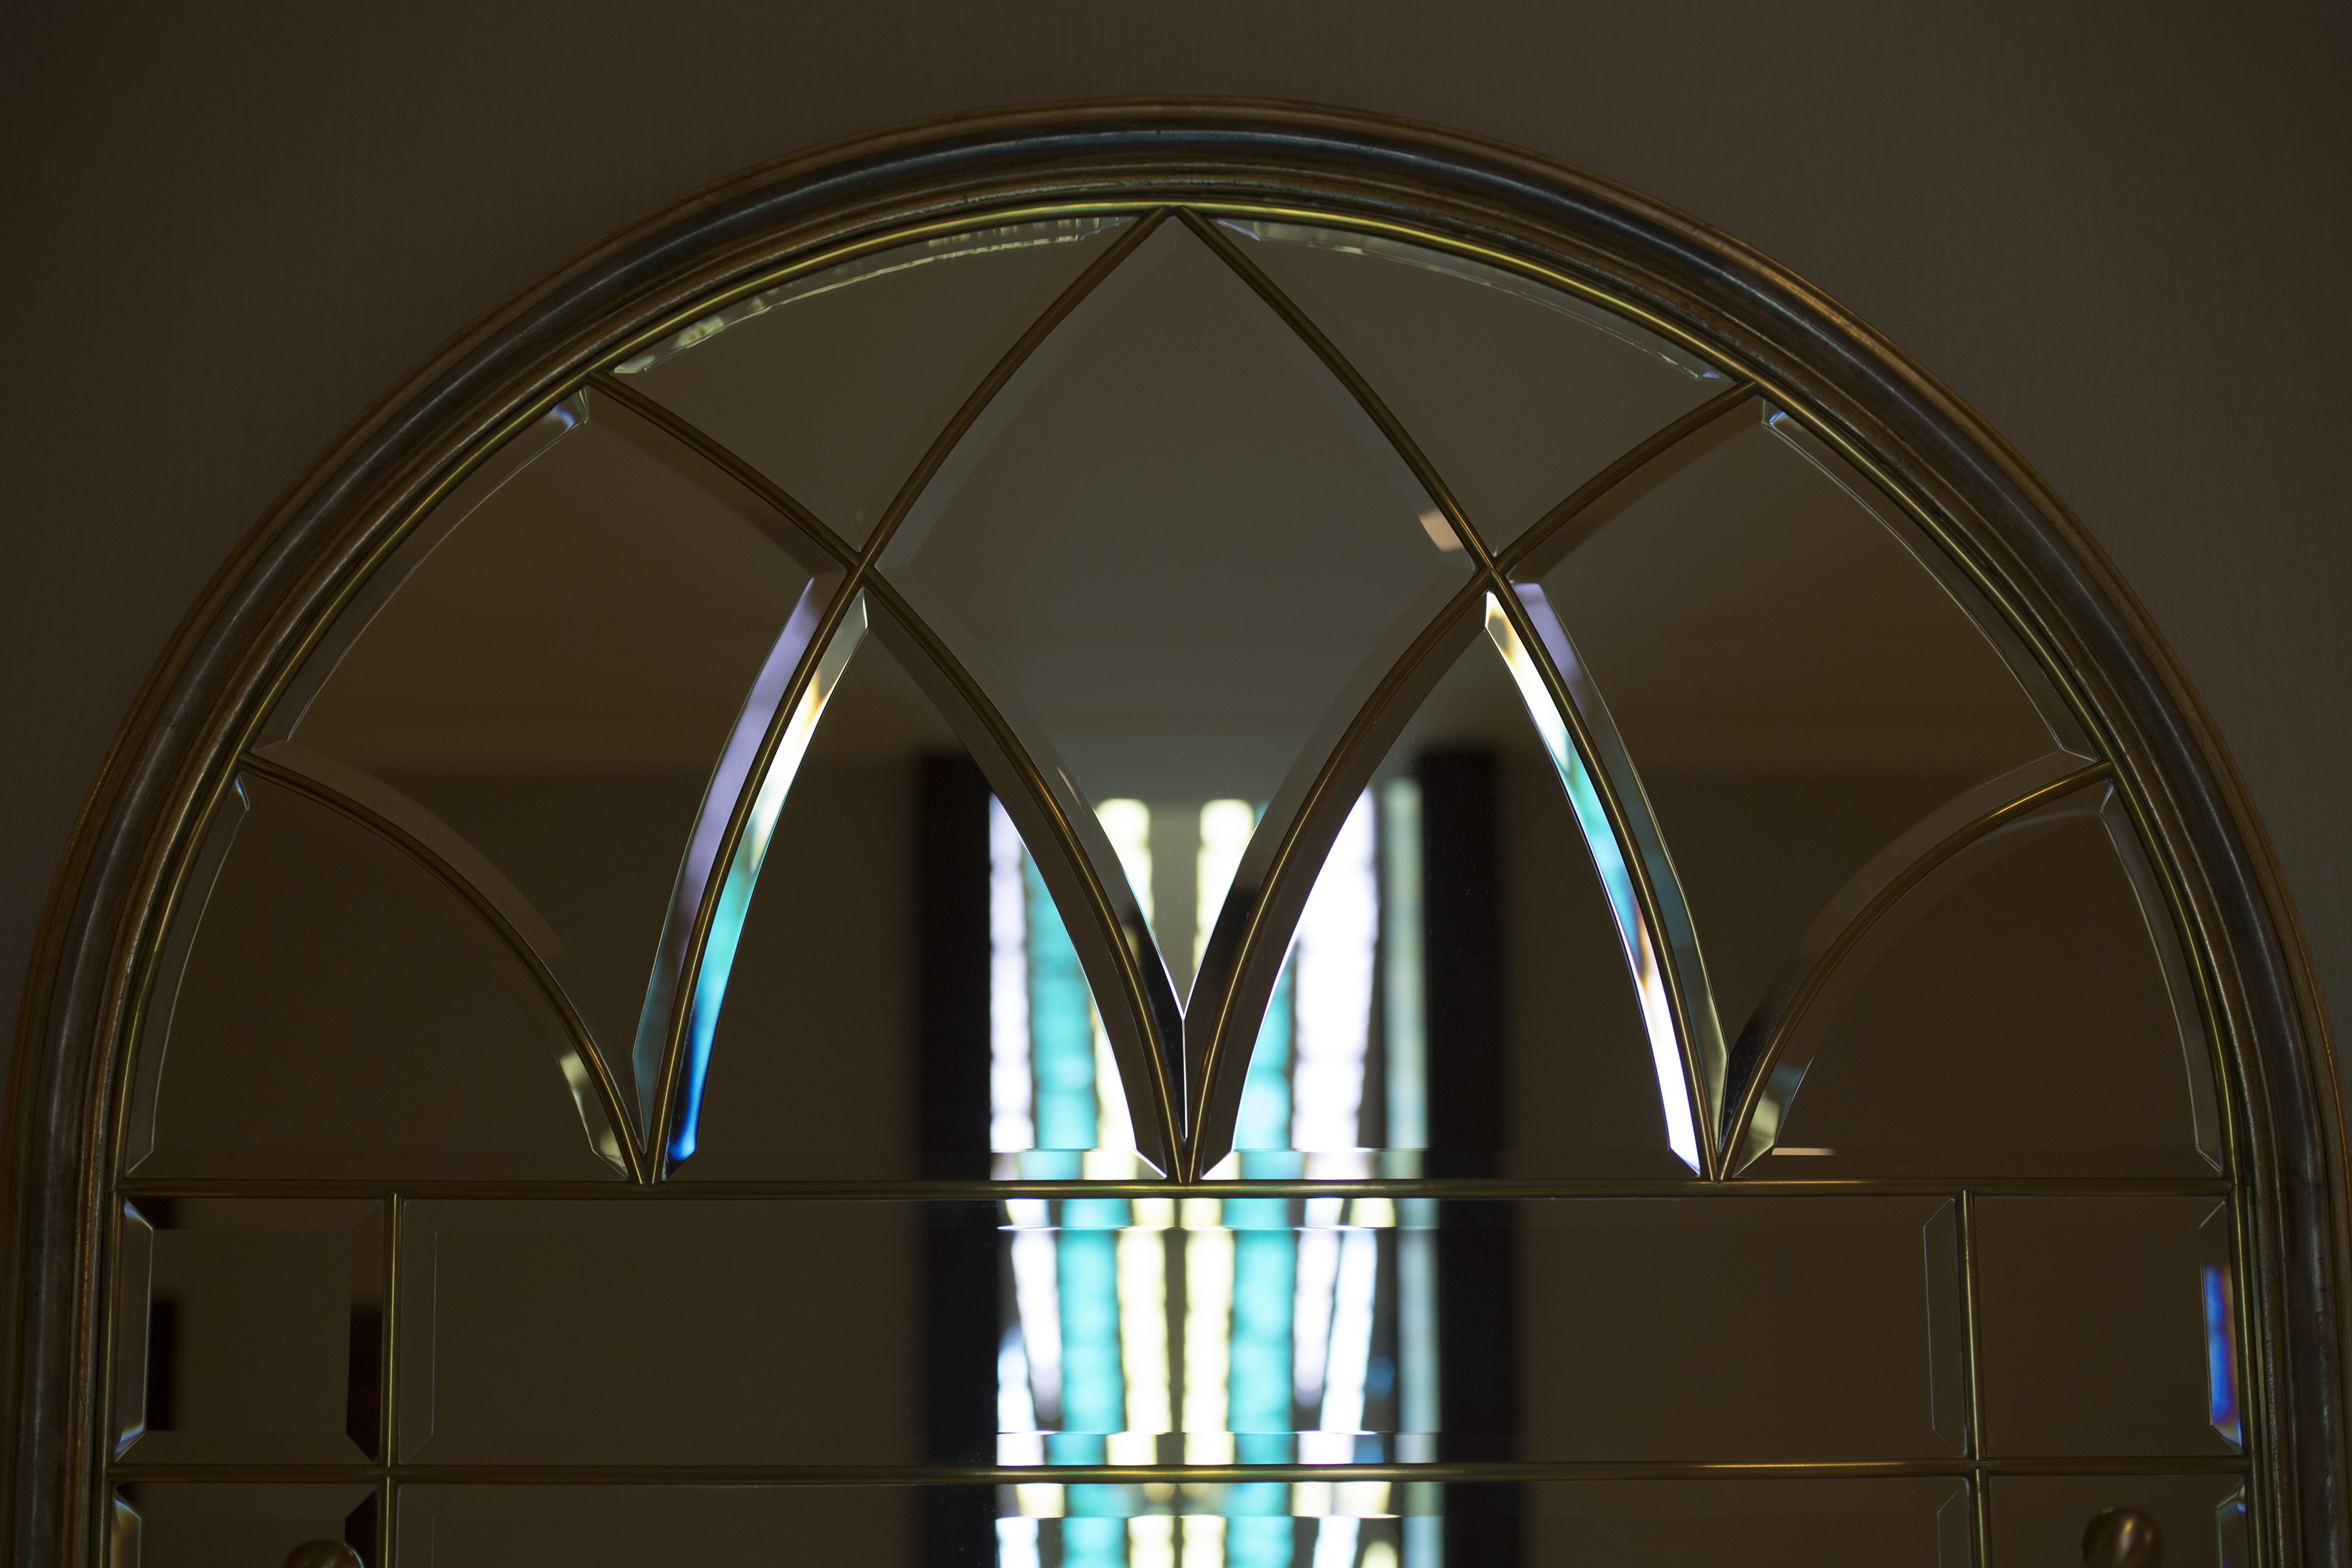 A close-up of an arched mirror reflecting white and light blue from an art glass window.